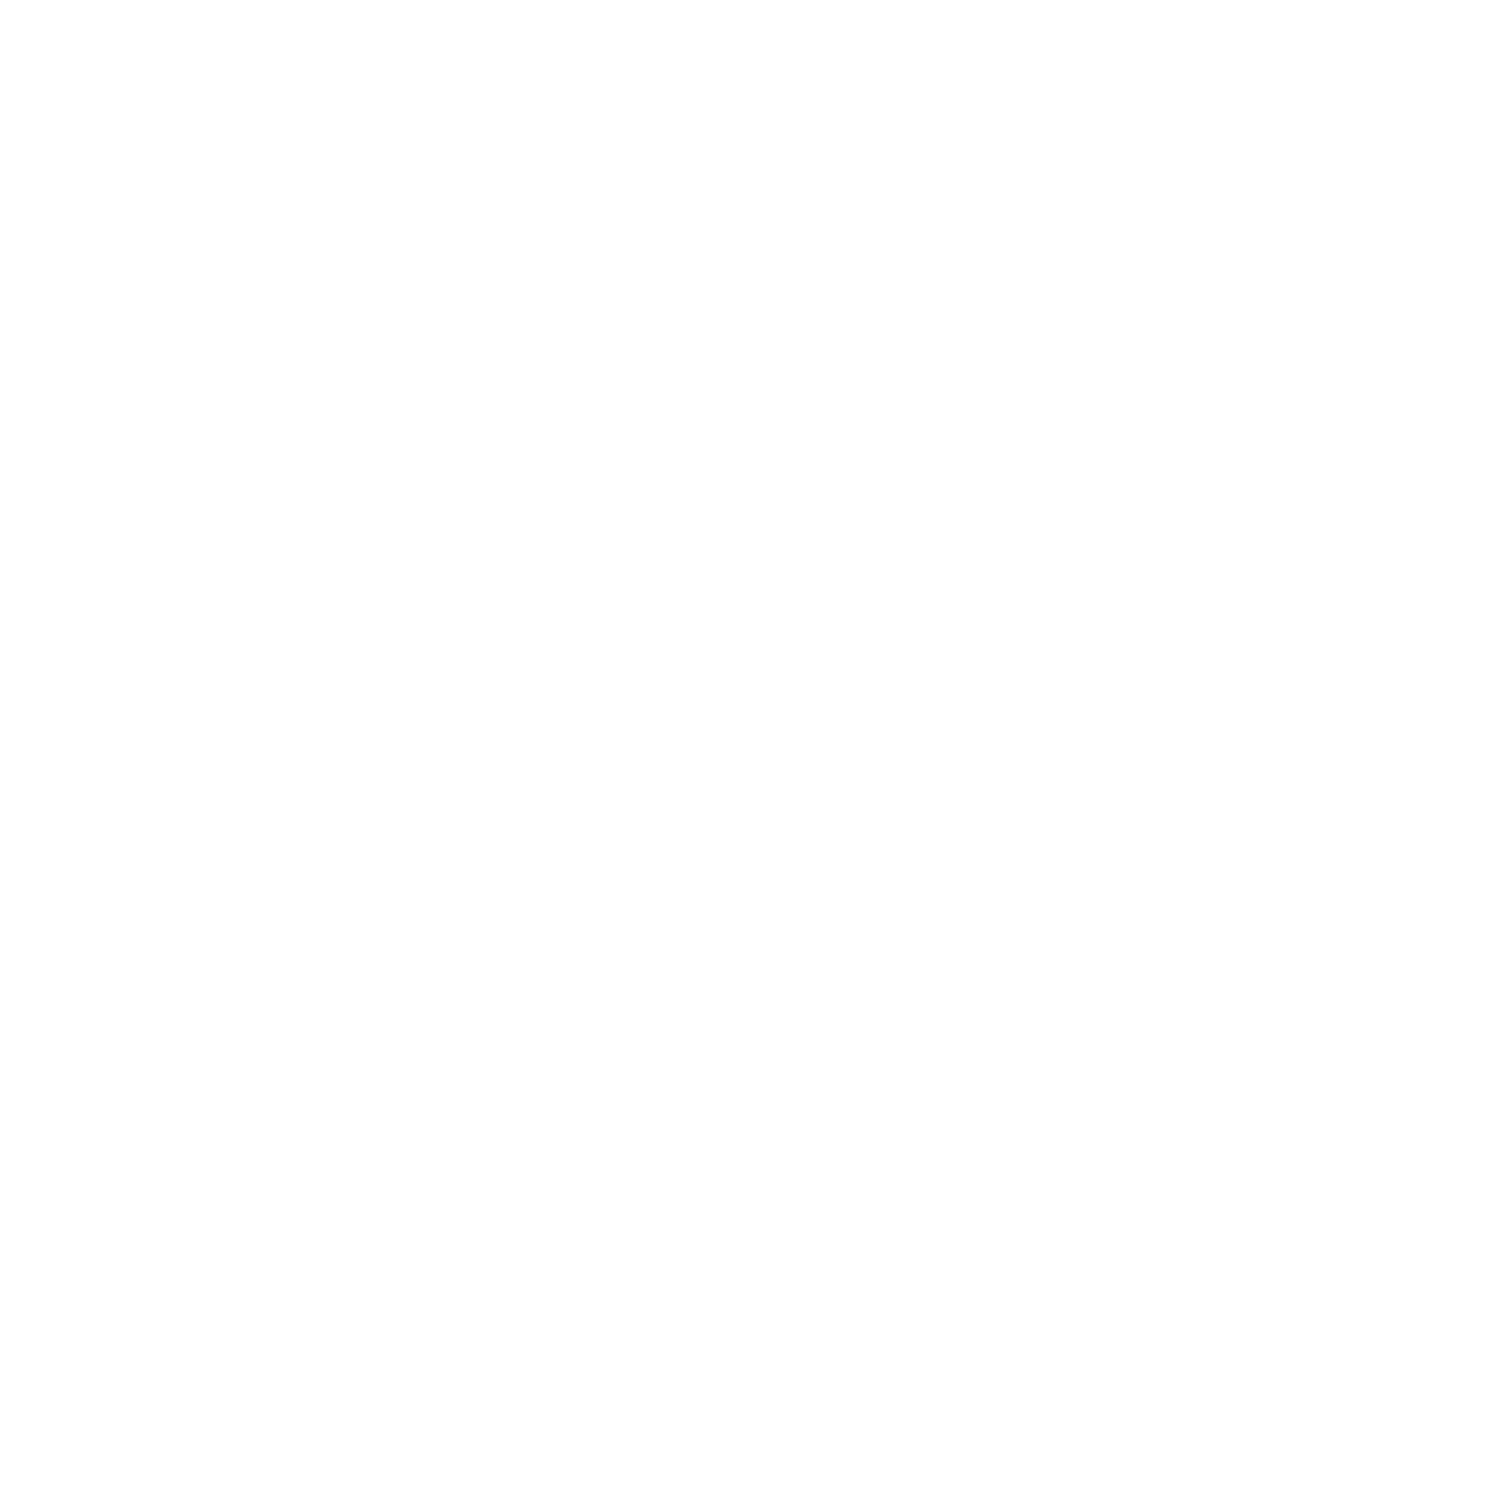 A Co, 1-151 AB "Nightmare"